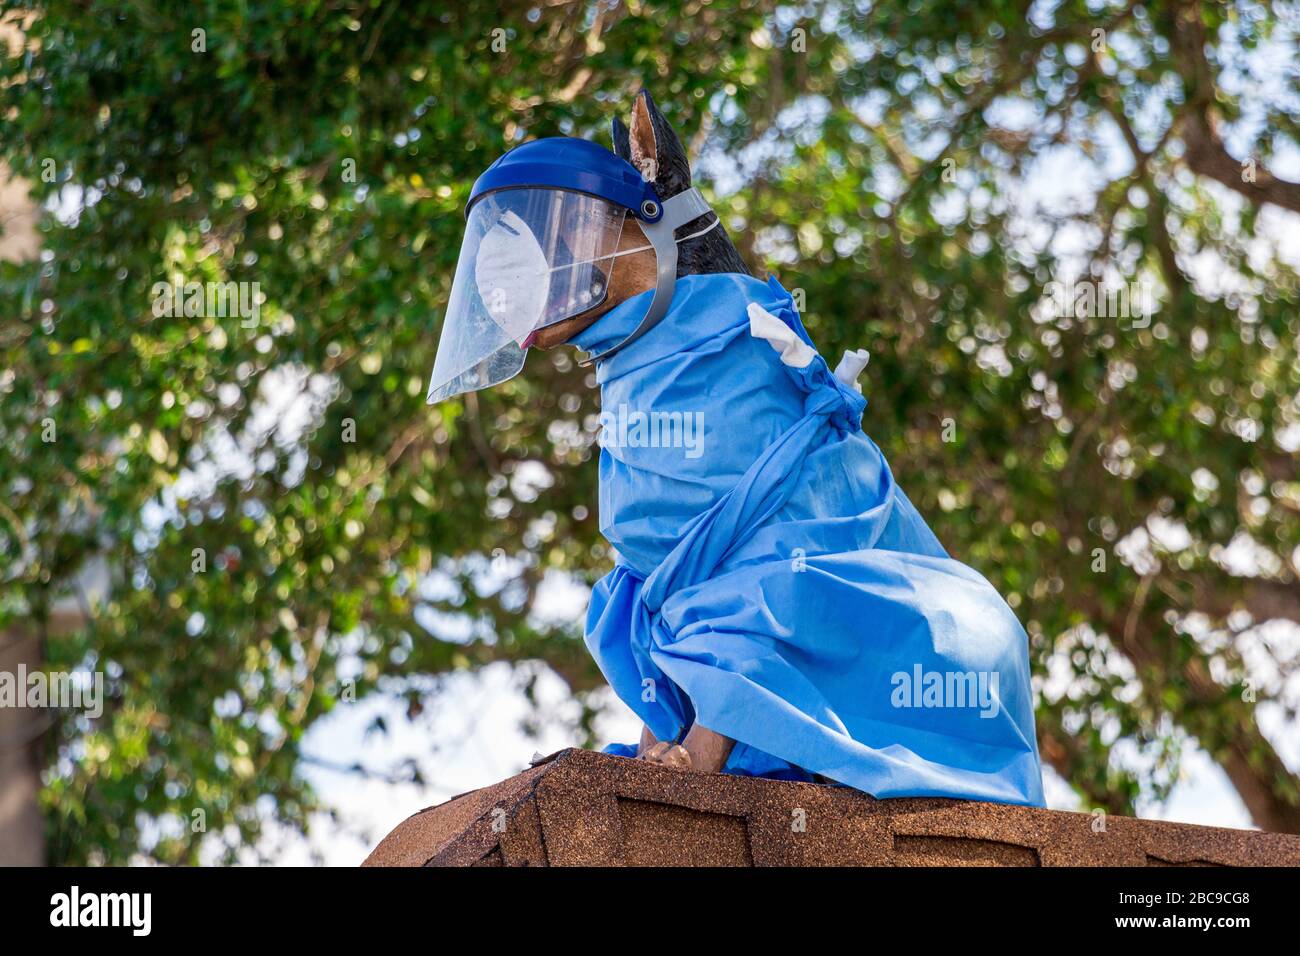 Statue of a dog with face mask, shield and surgical gown outside of a veterinary hospital, during COVID-19 outbreak - Davie, Florida, USA Stock Photo